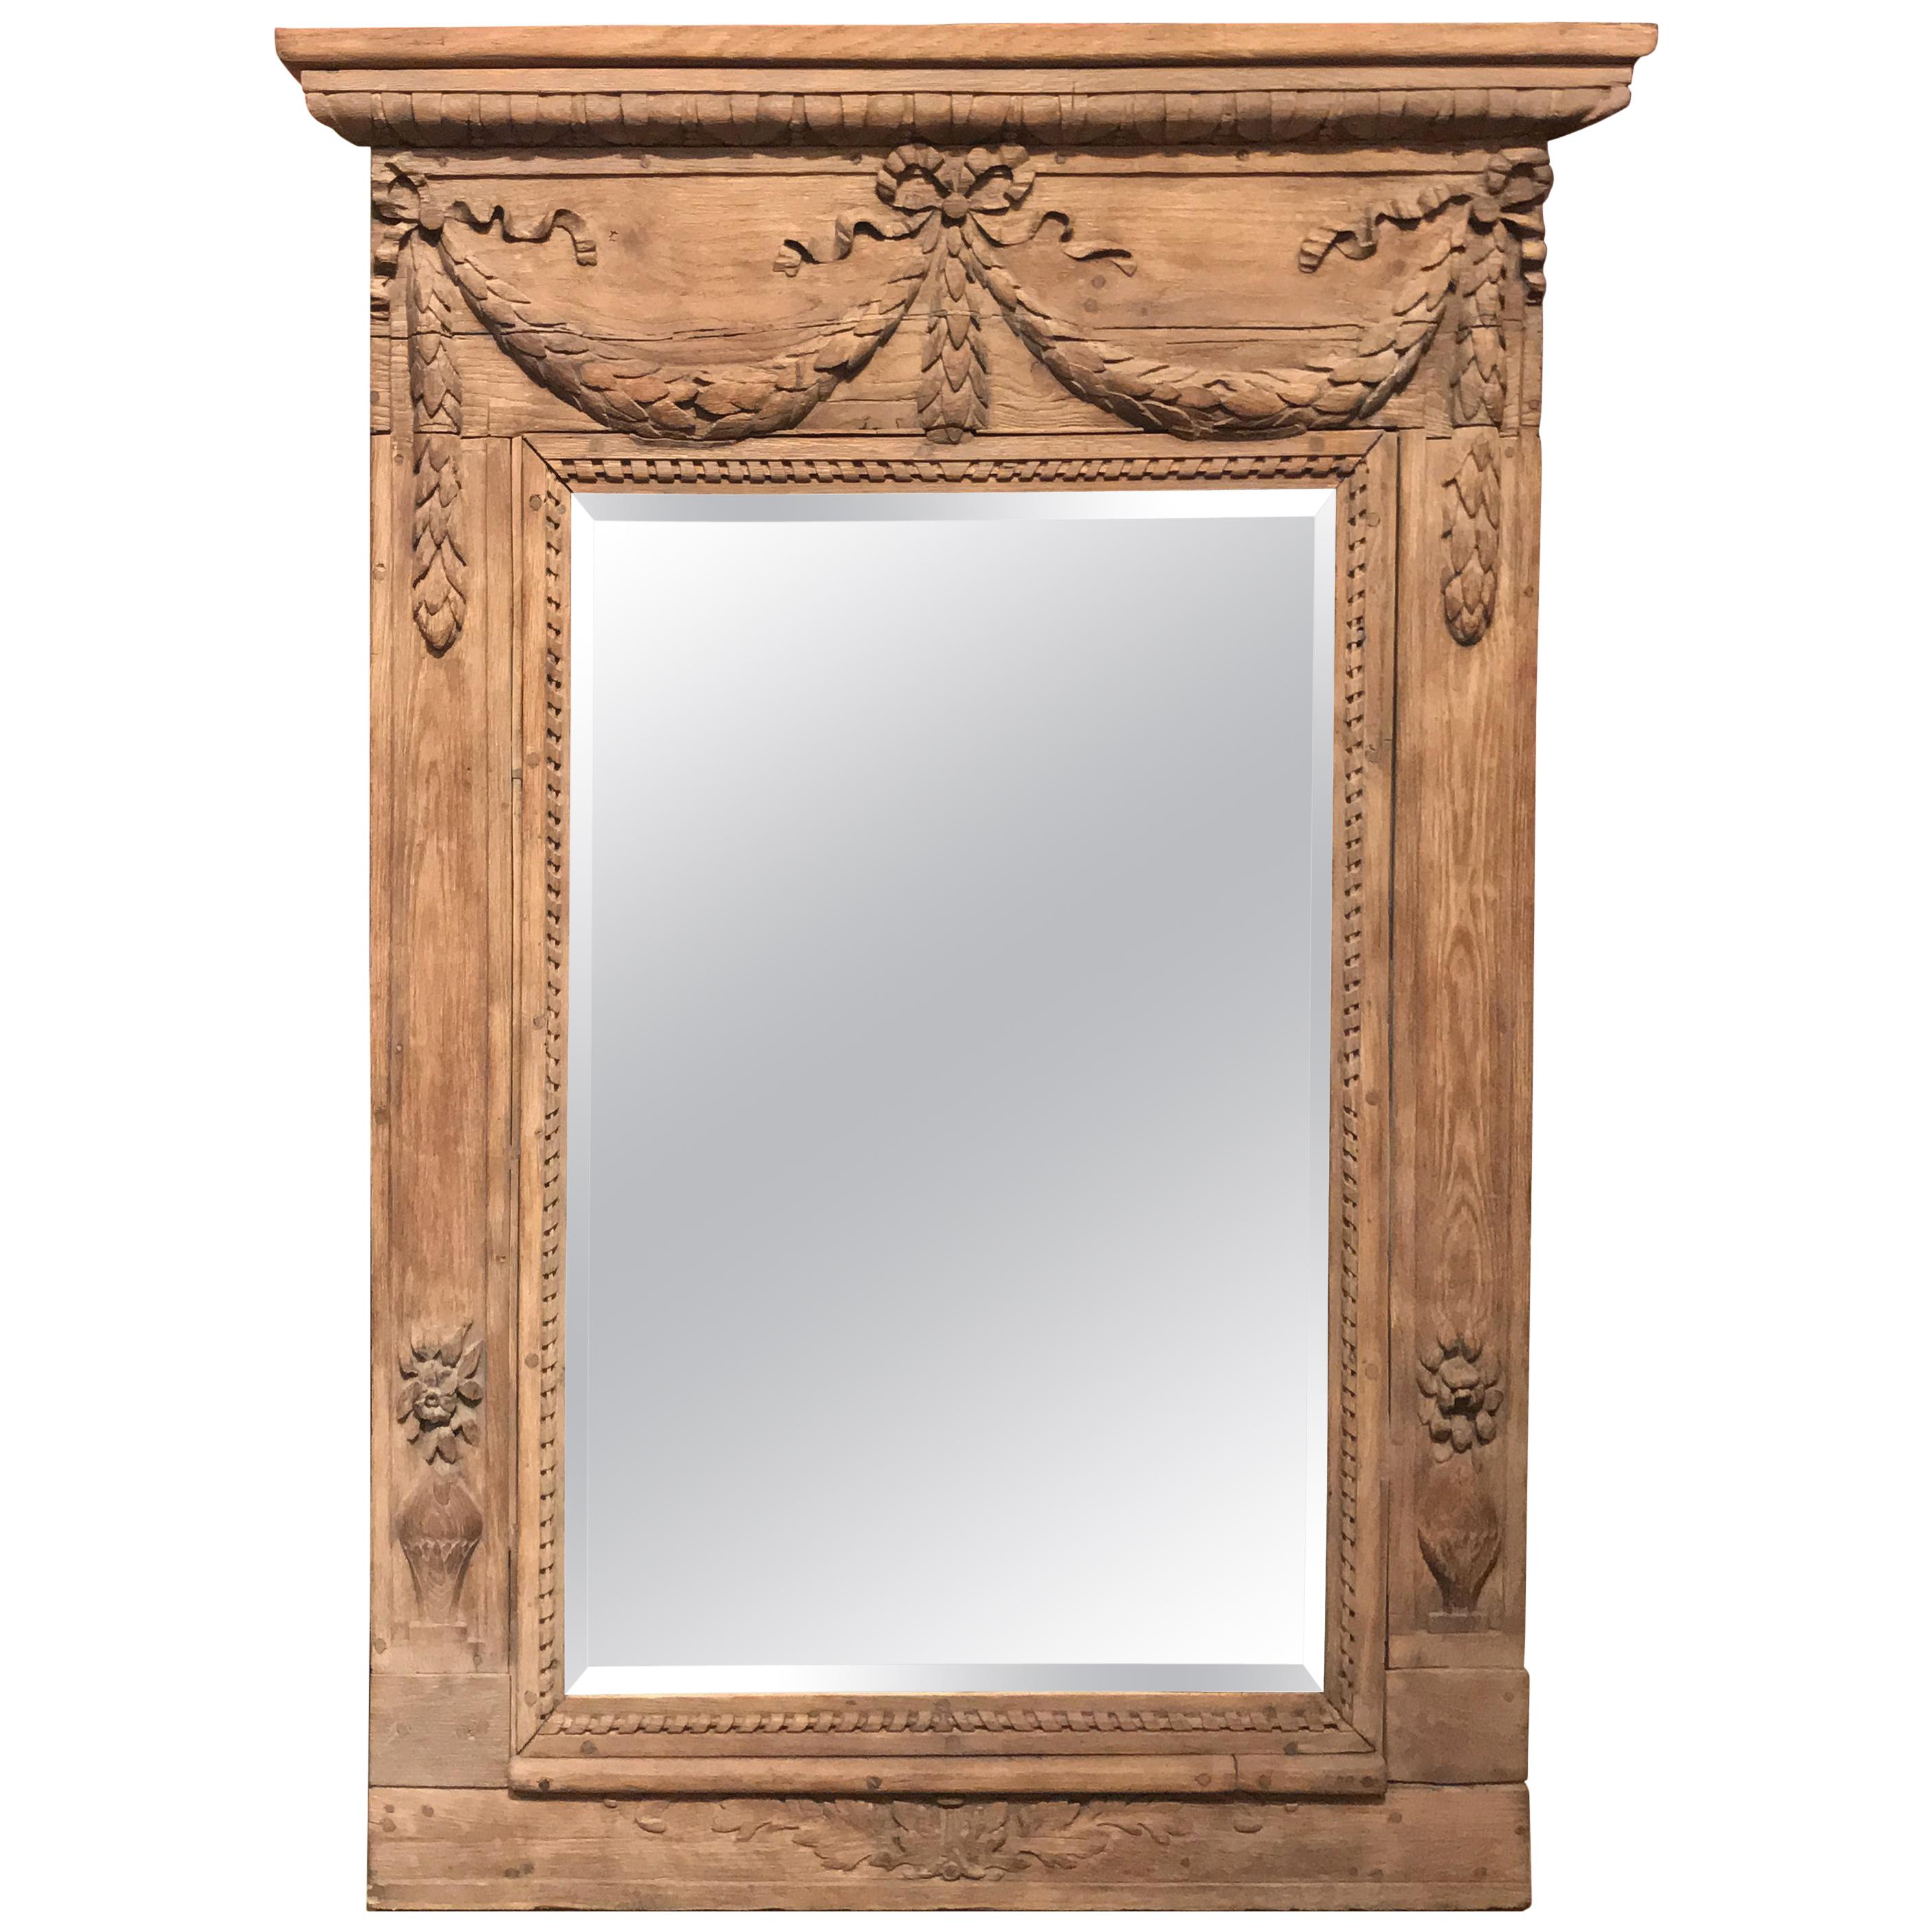 18th Century French Carved Oak Wall Mirror with Swag Decoration